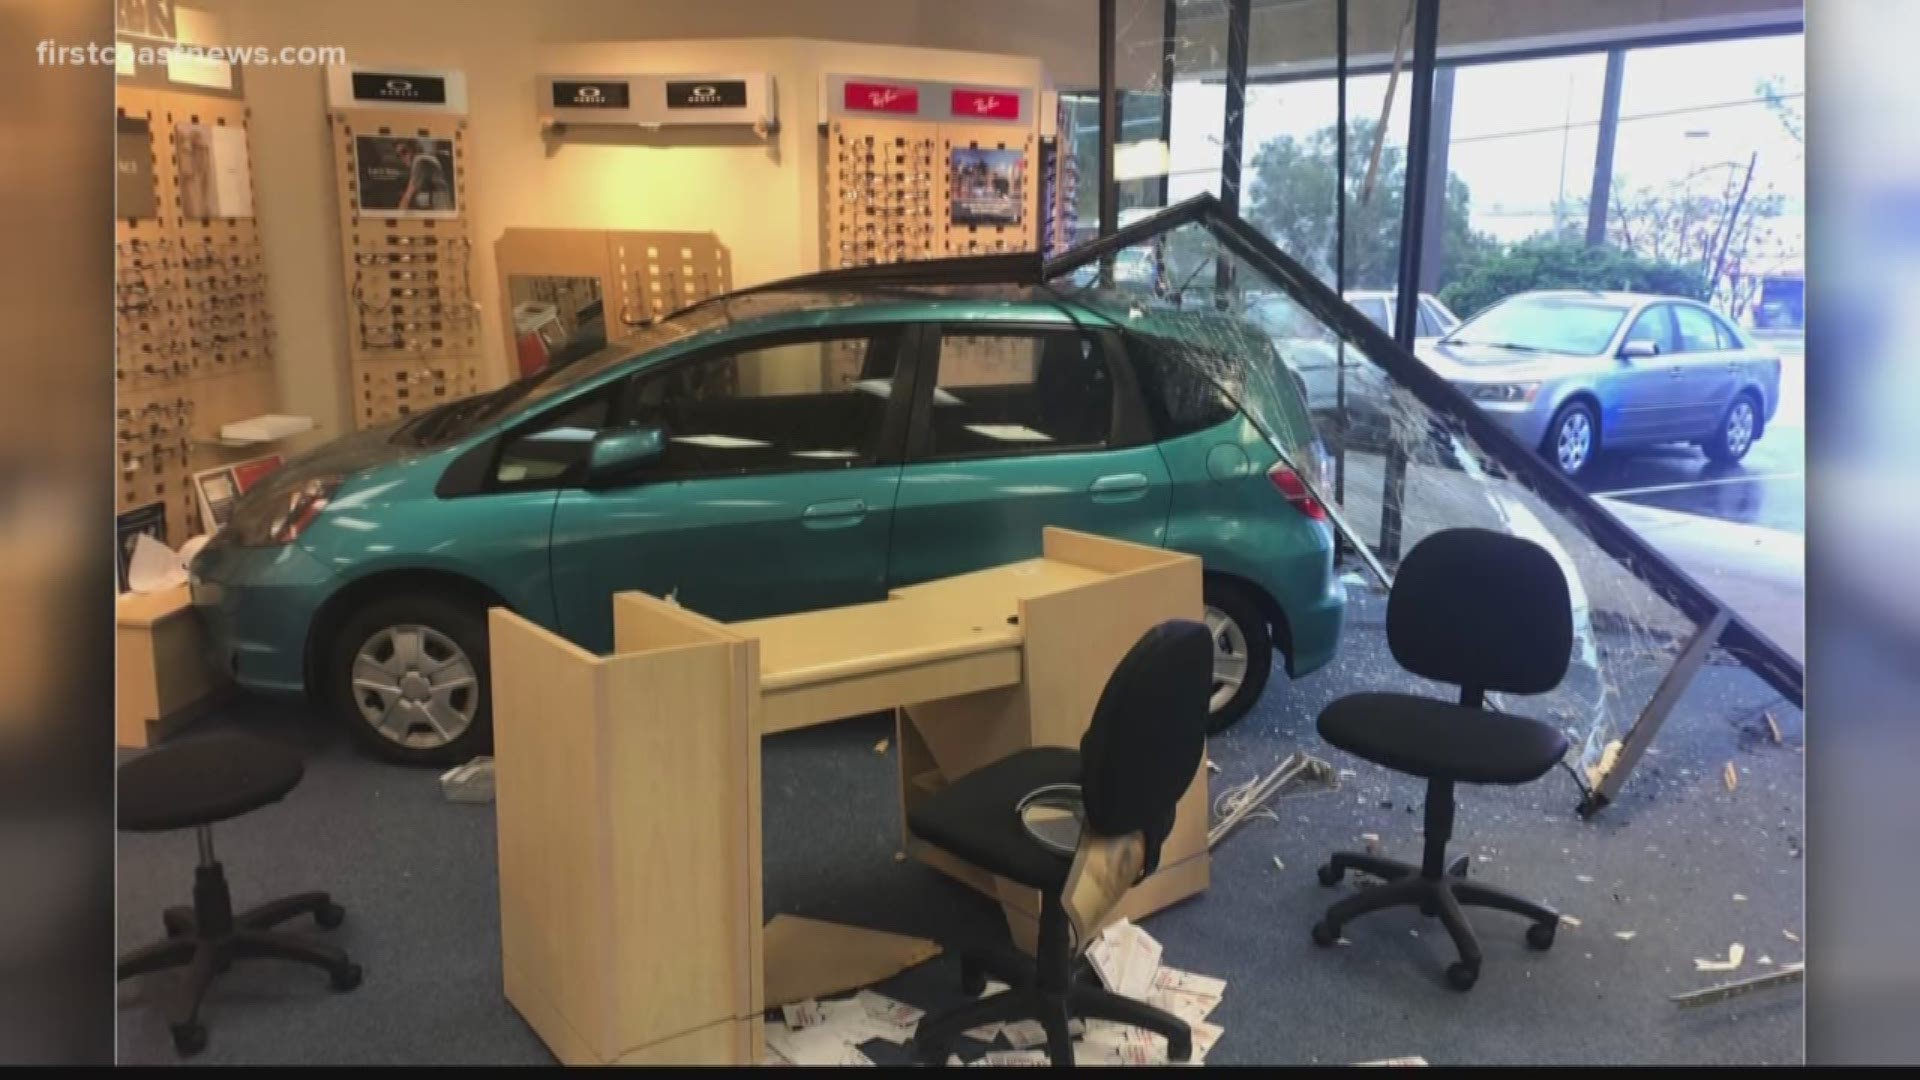 An elderly woman was rushed to a hospital after crashing a vehicle into a LensCrafters near Orange Park Mall.